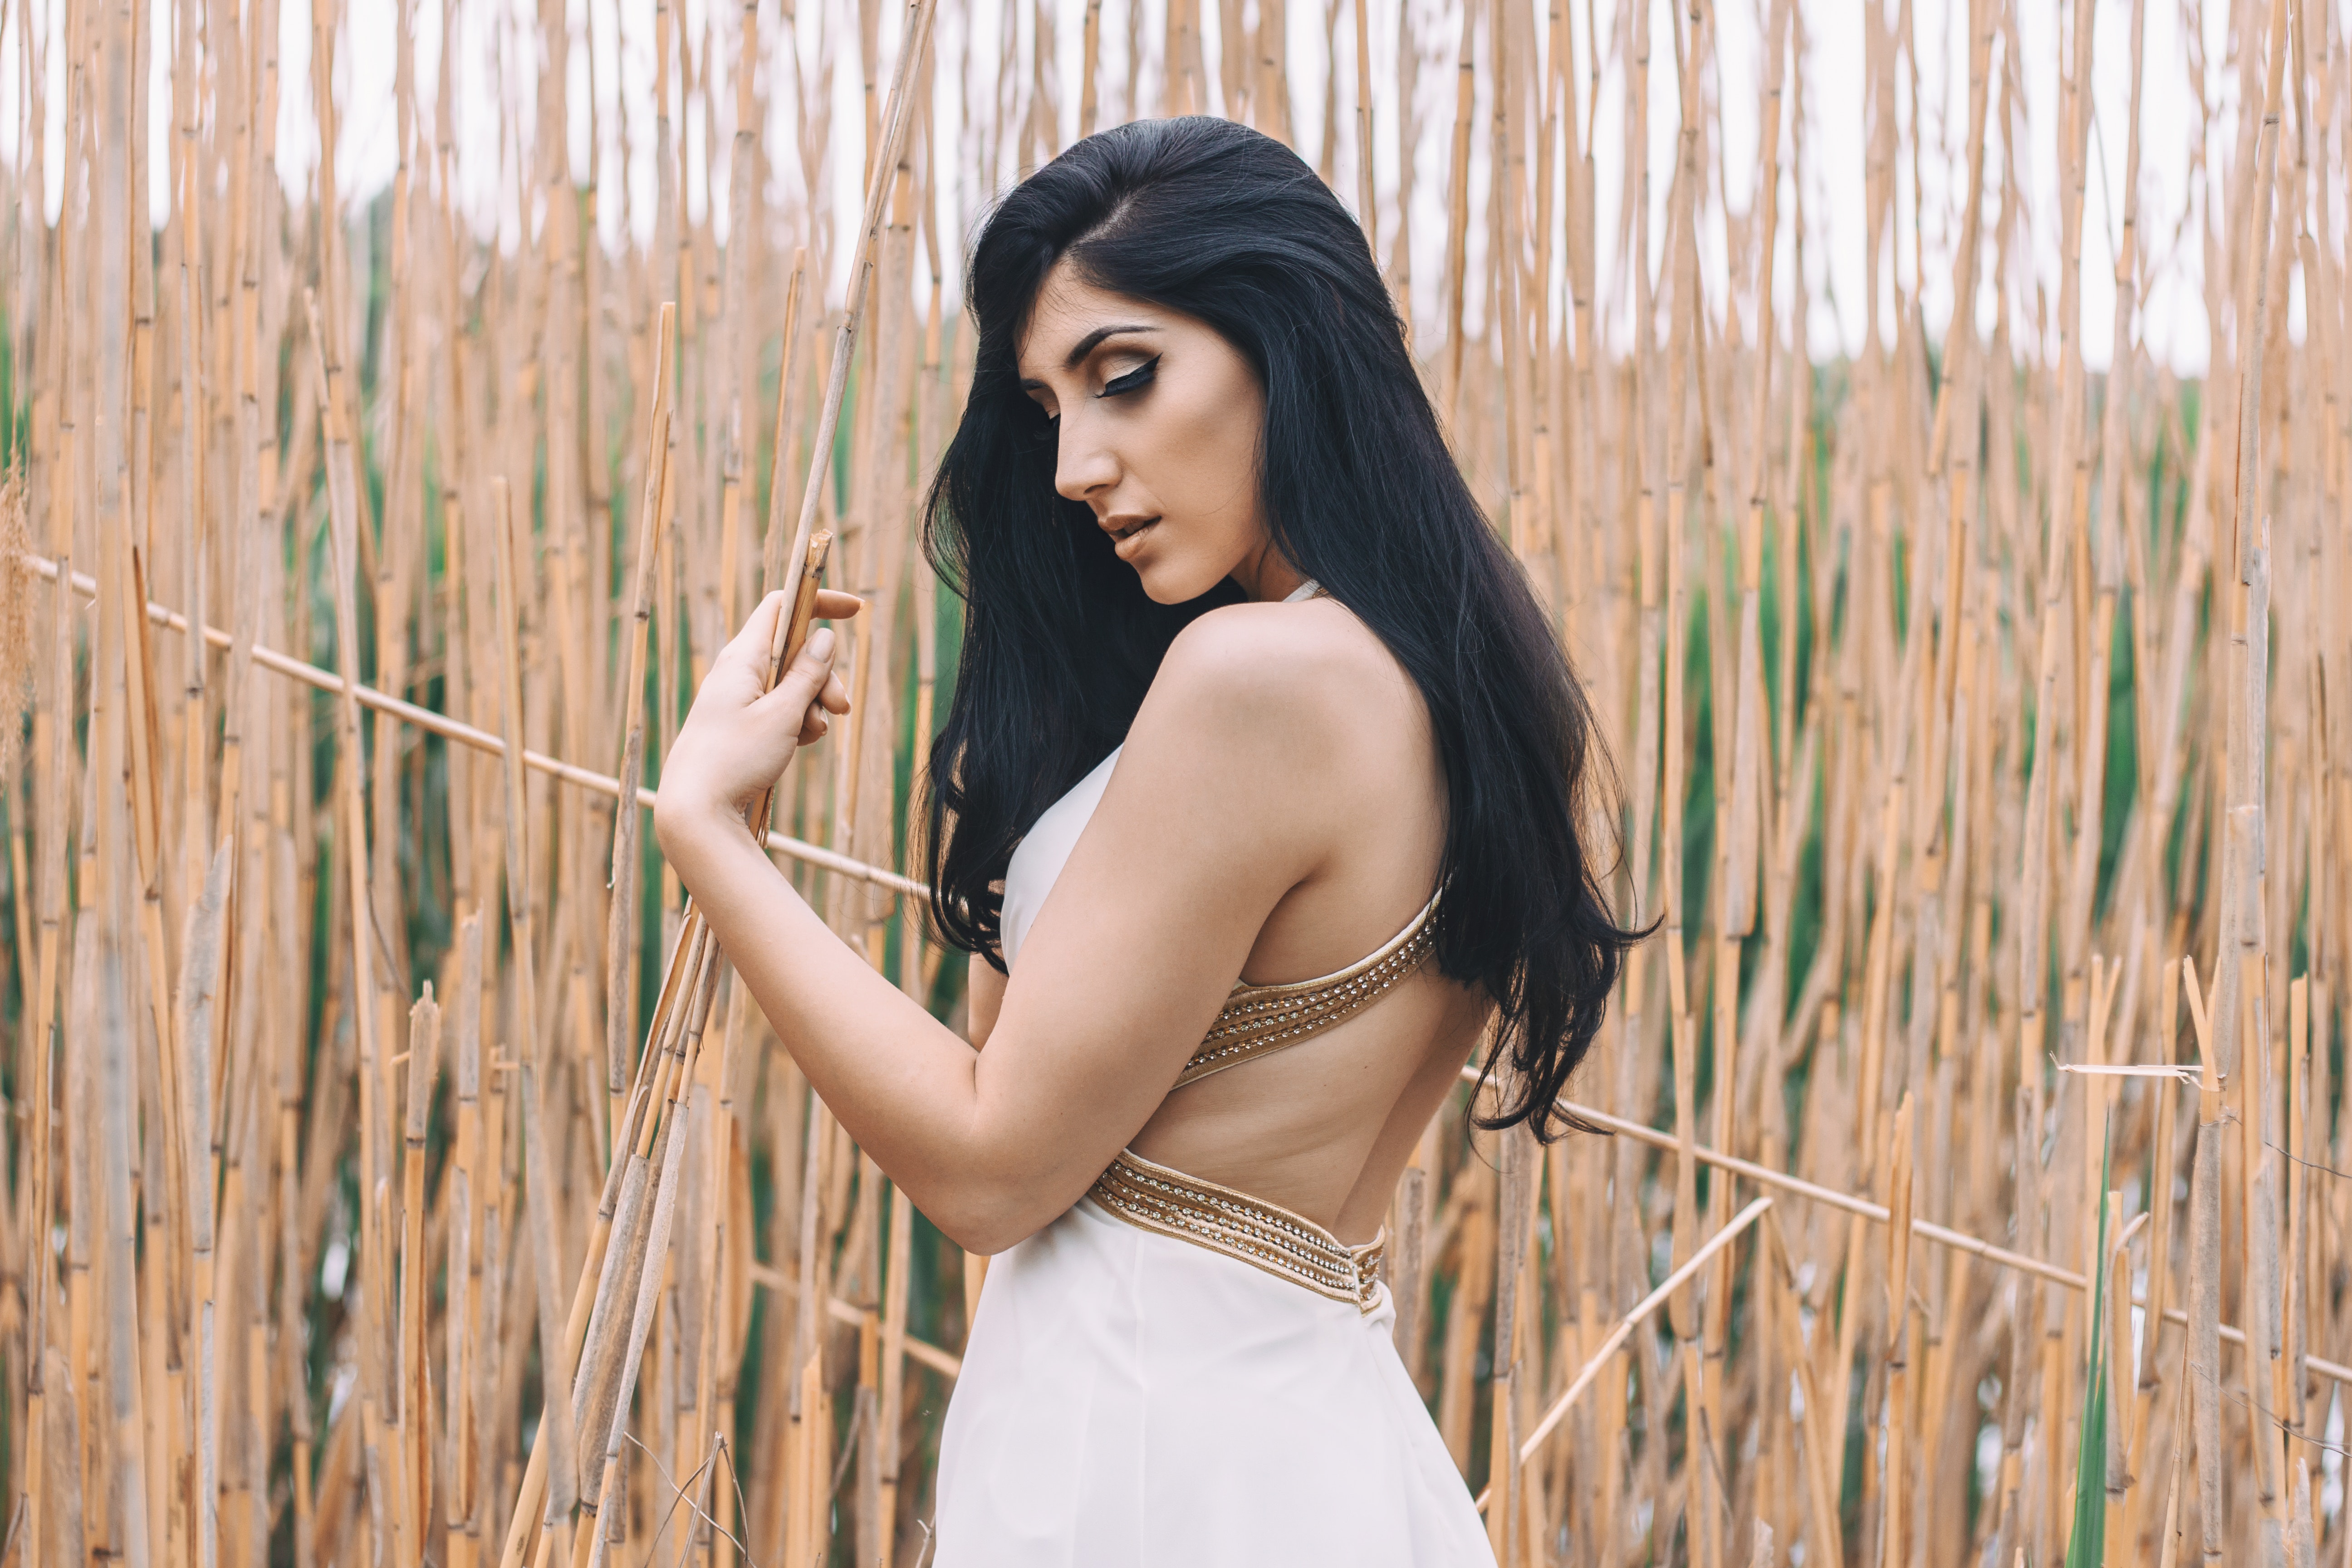 Woman in white backless dress in front of bamboo sticks photo